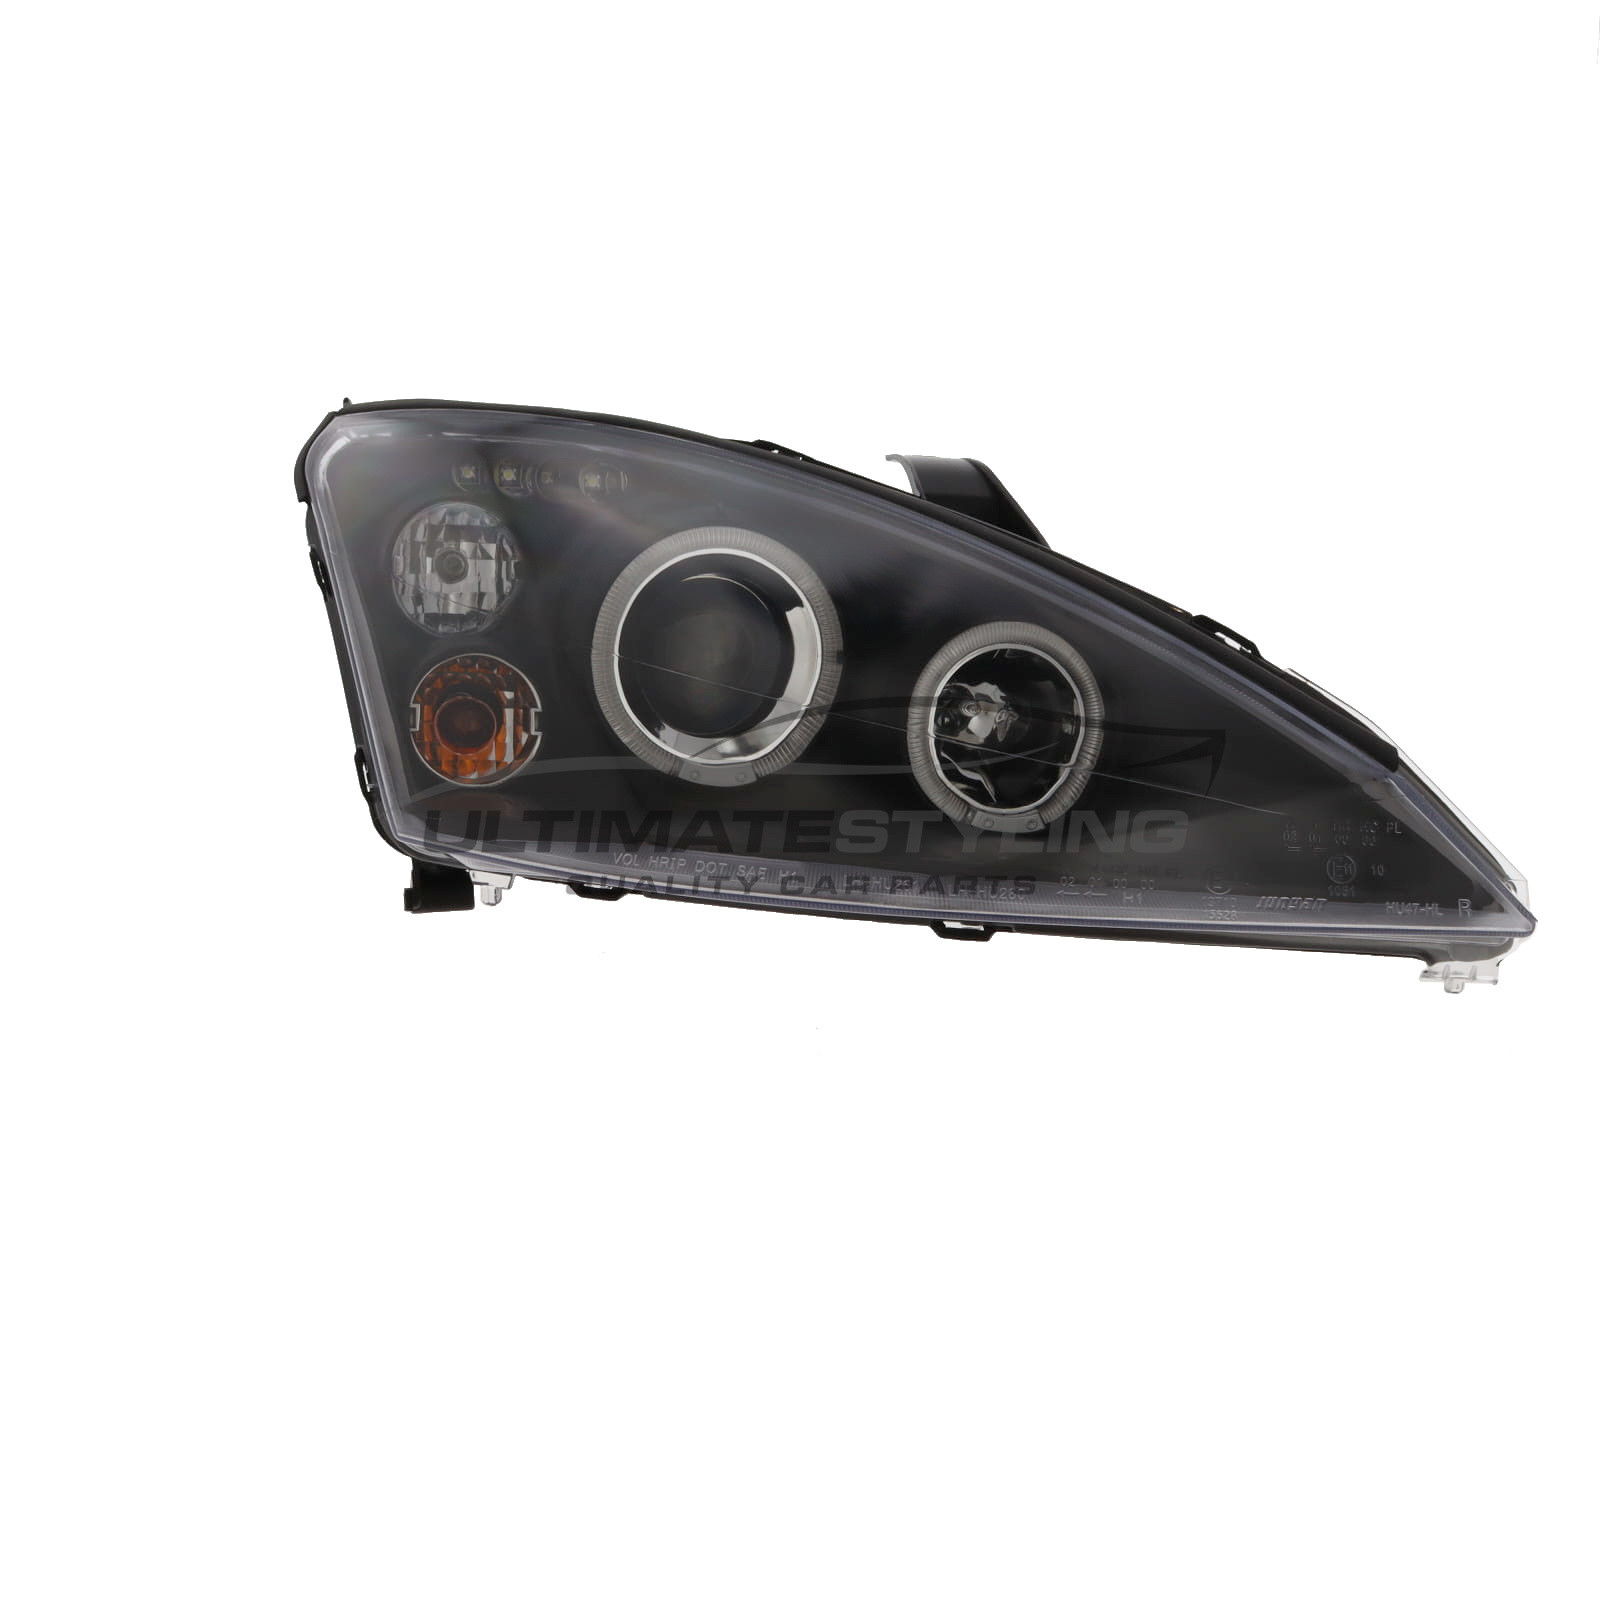 Ford Focus Mk1 2001-2004 Upgrade Headlights Black Inner LED Twin Angel Eyes and DRL Projector Xenon Look